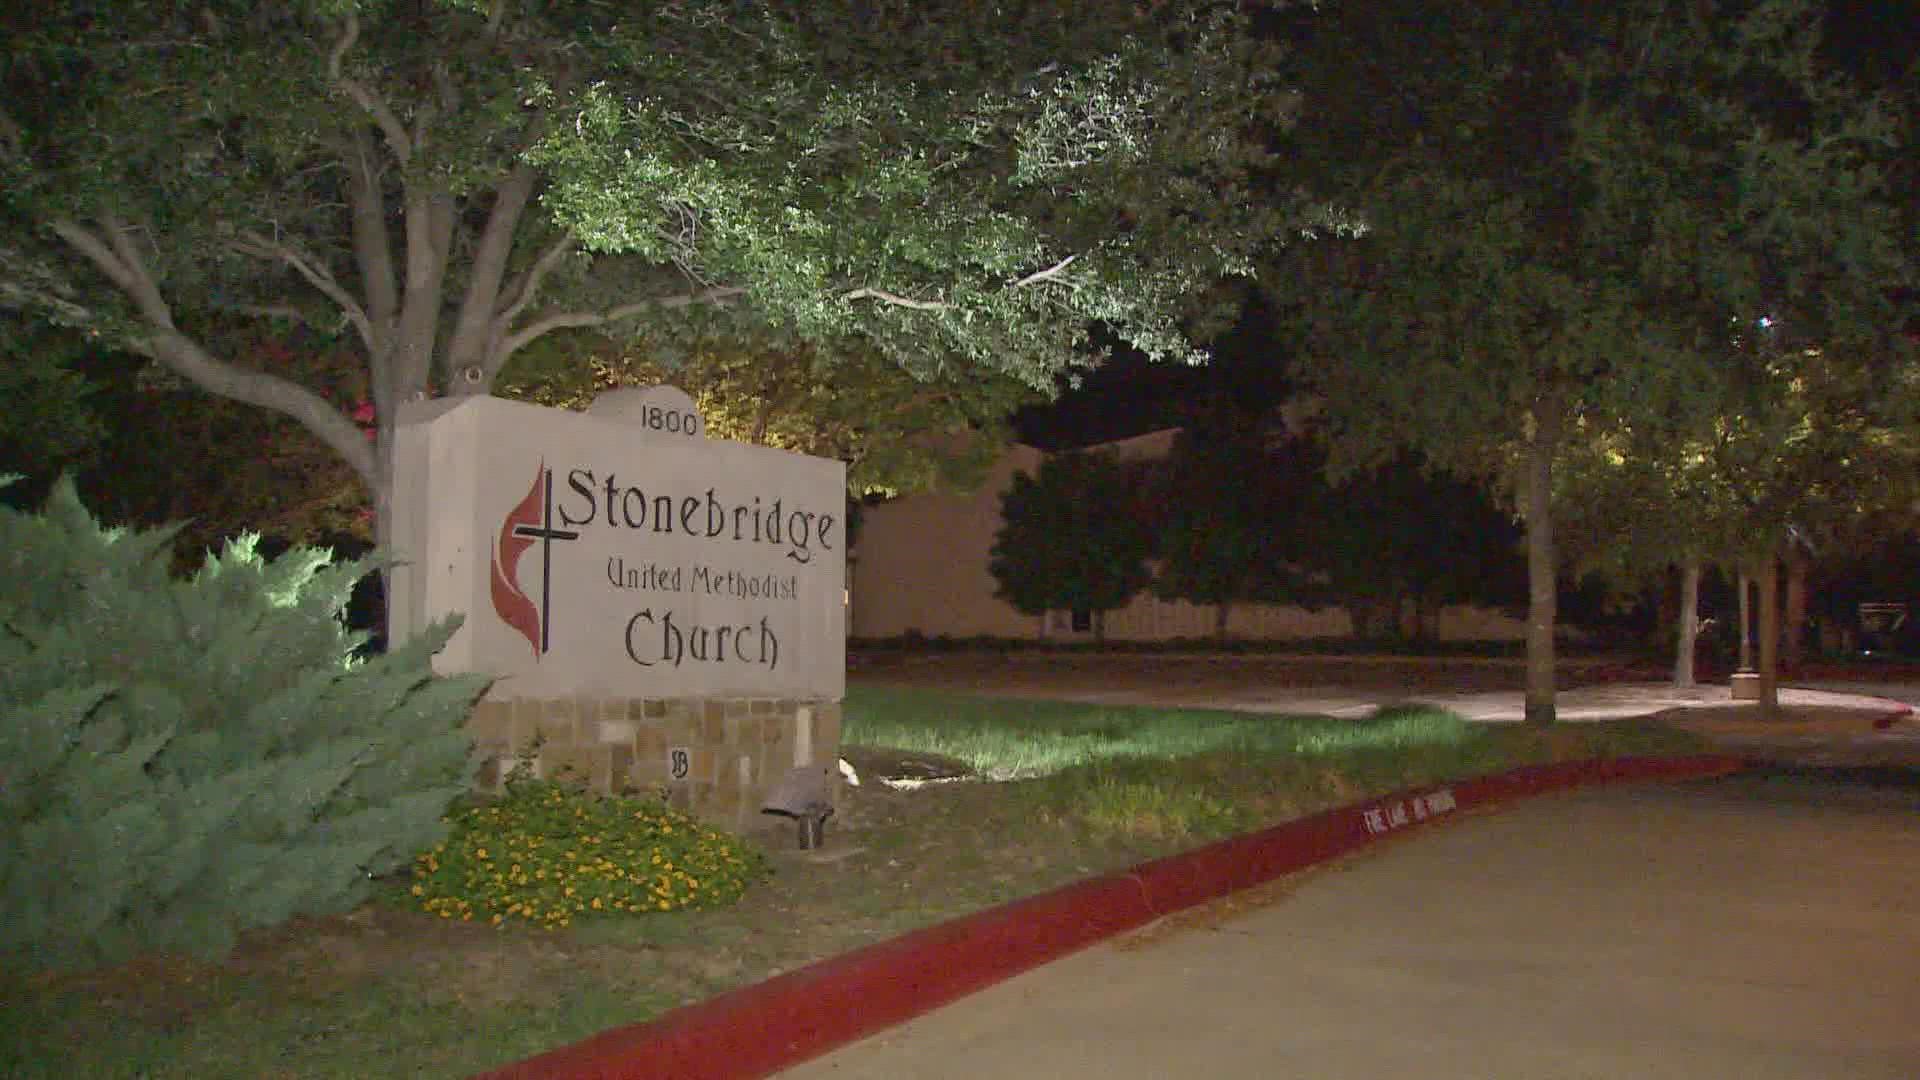 Police say it's the second time the church has been vandalized.